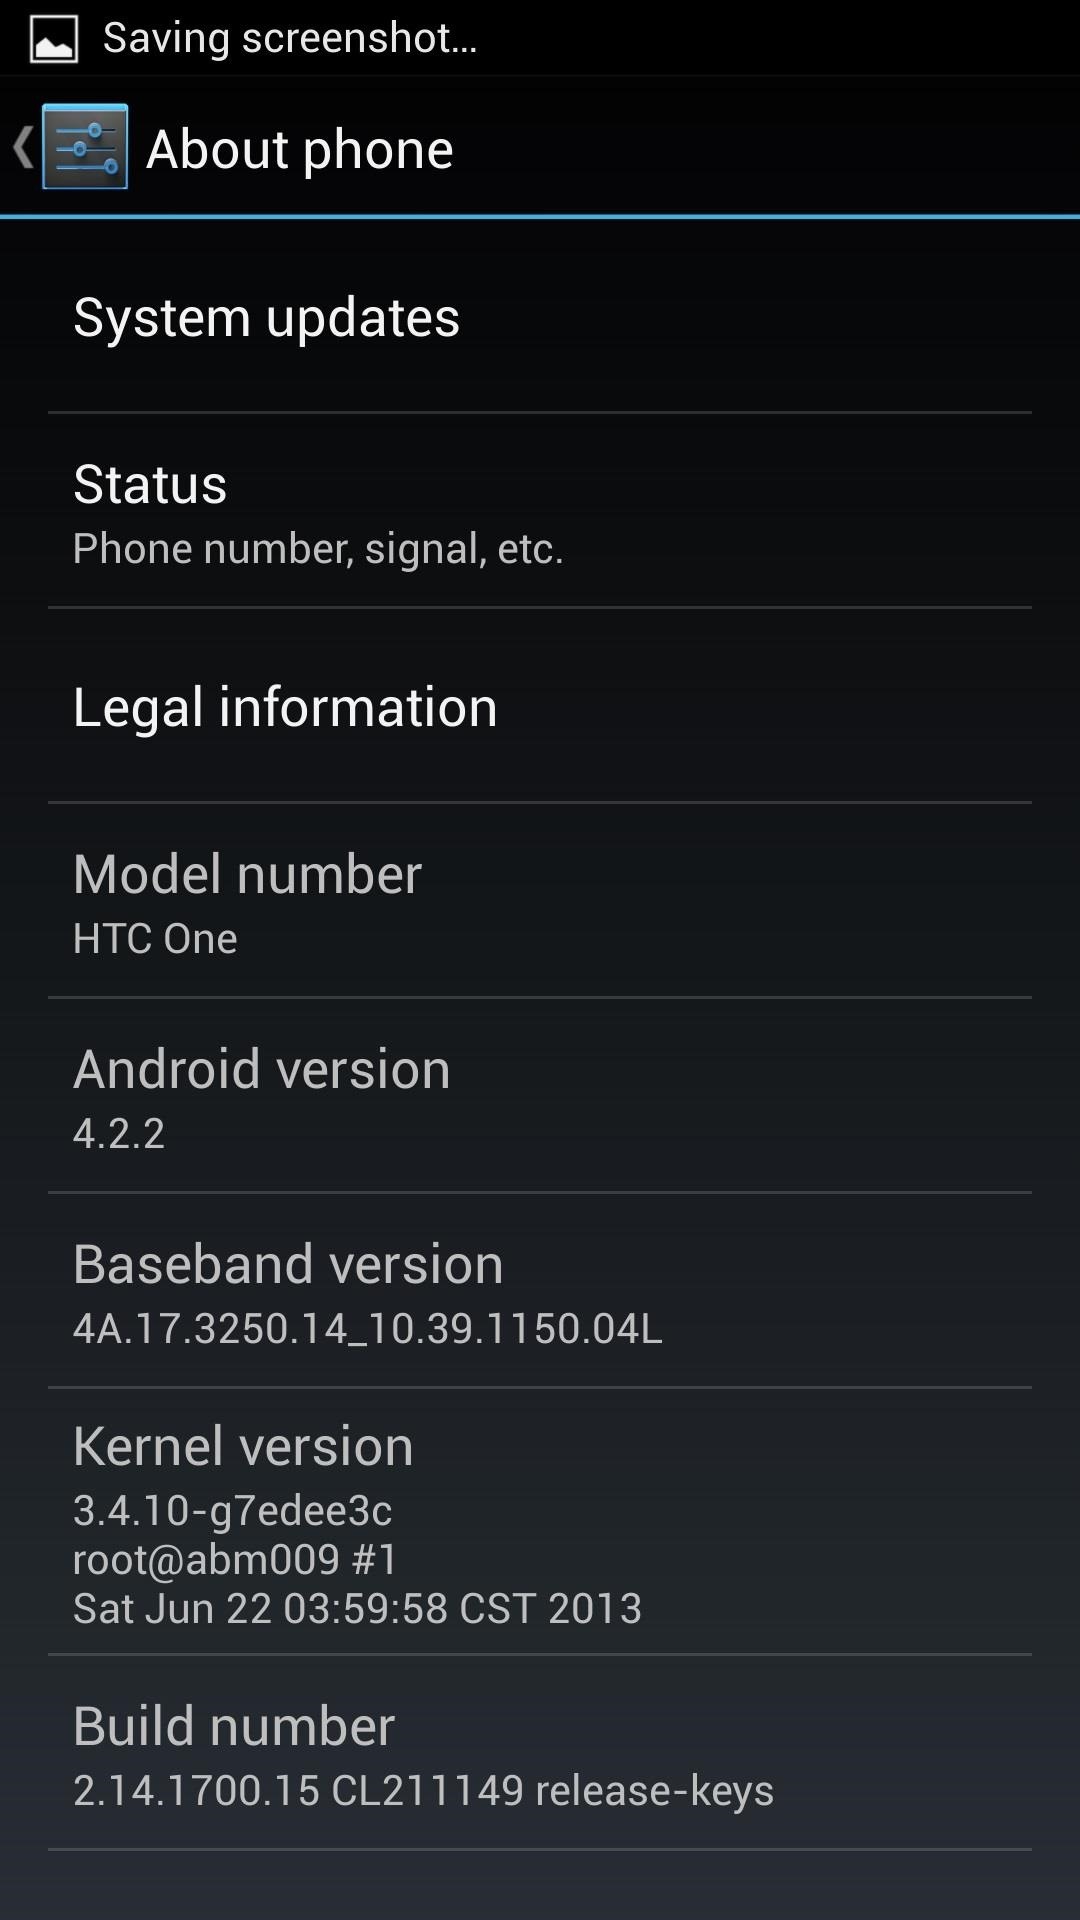 How to Unlock the Bootloader, Install TWRP, & Root the Google Play Edition HTC One